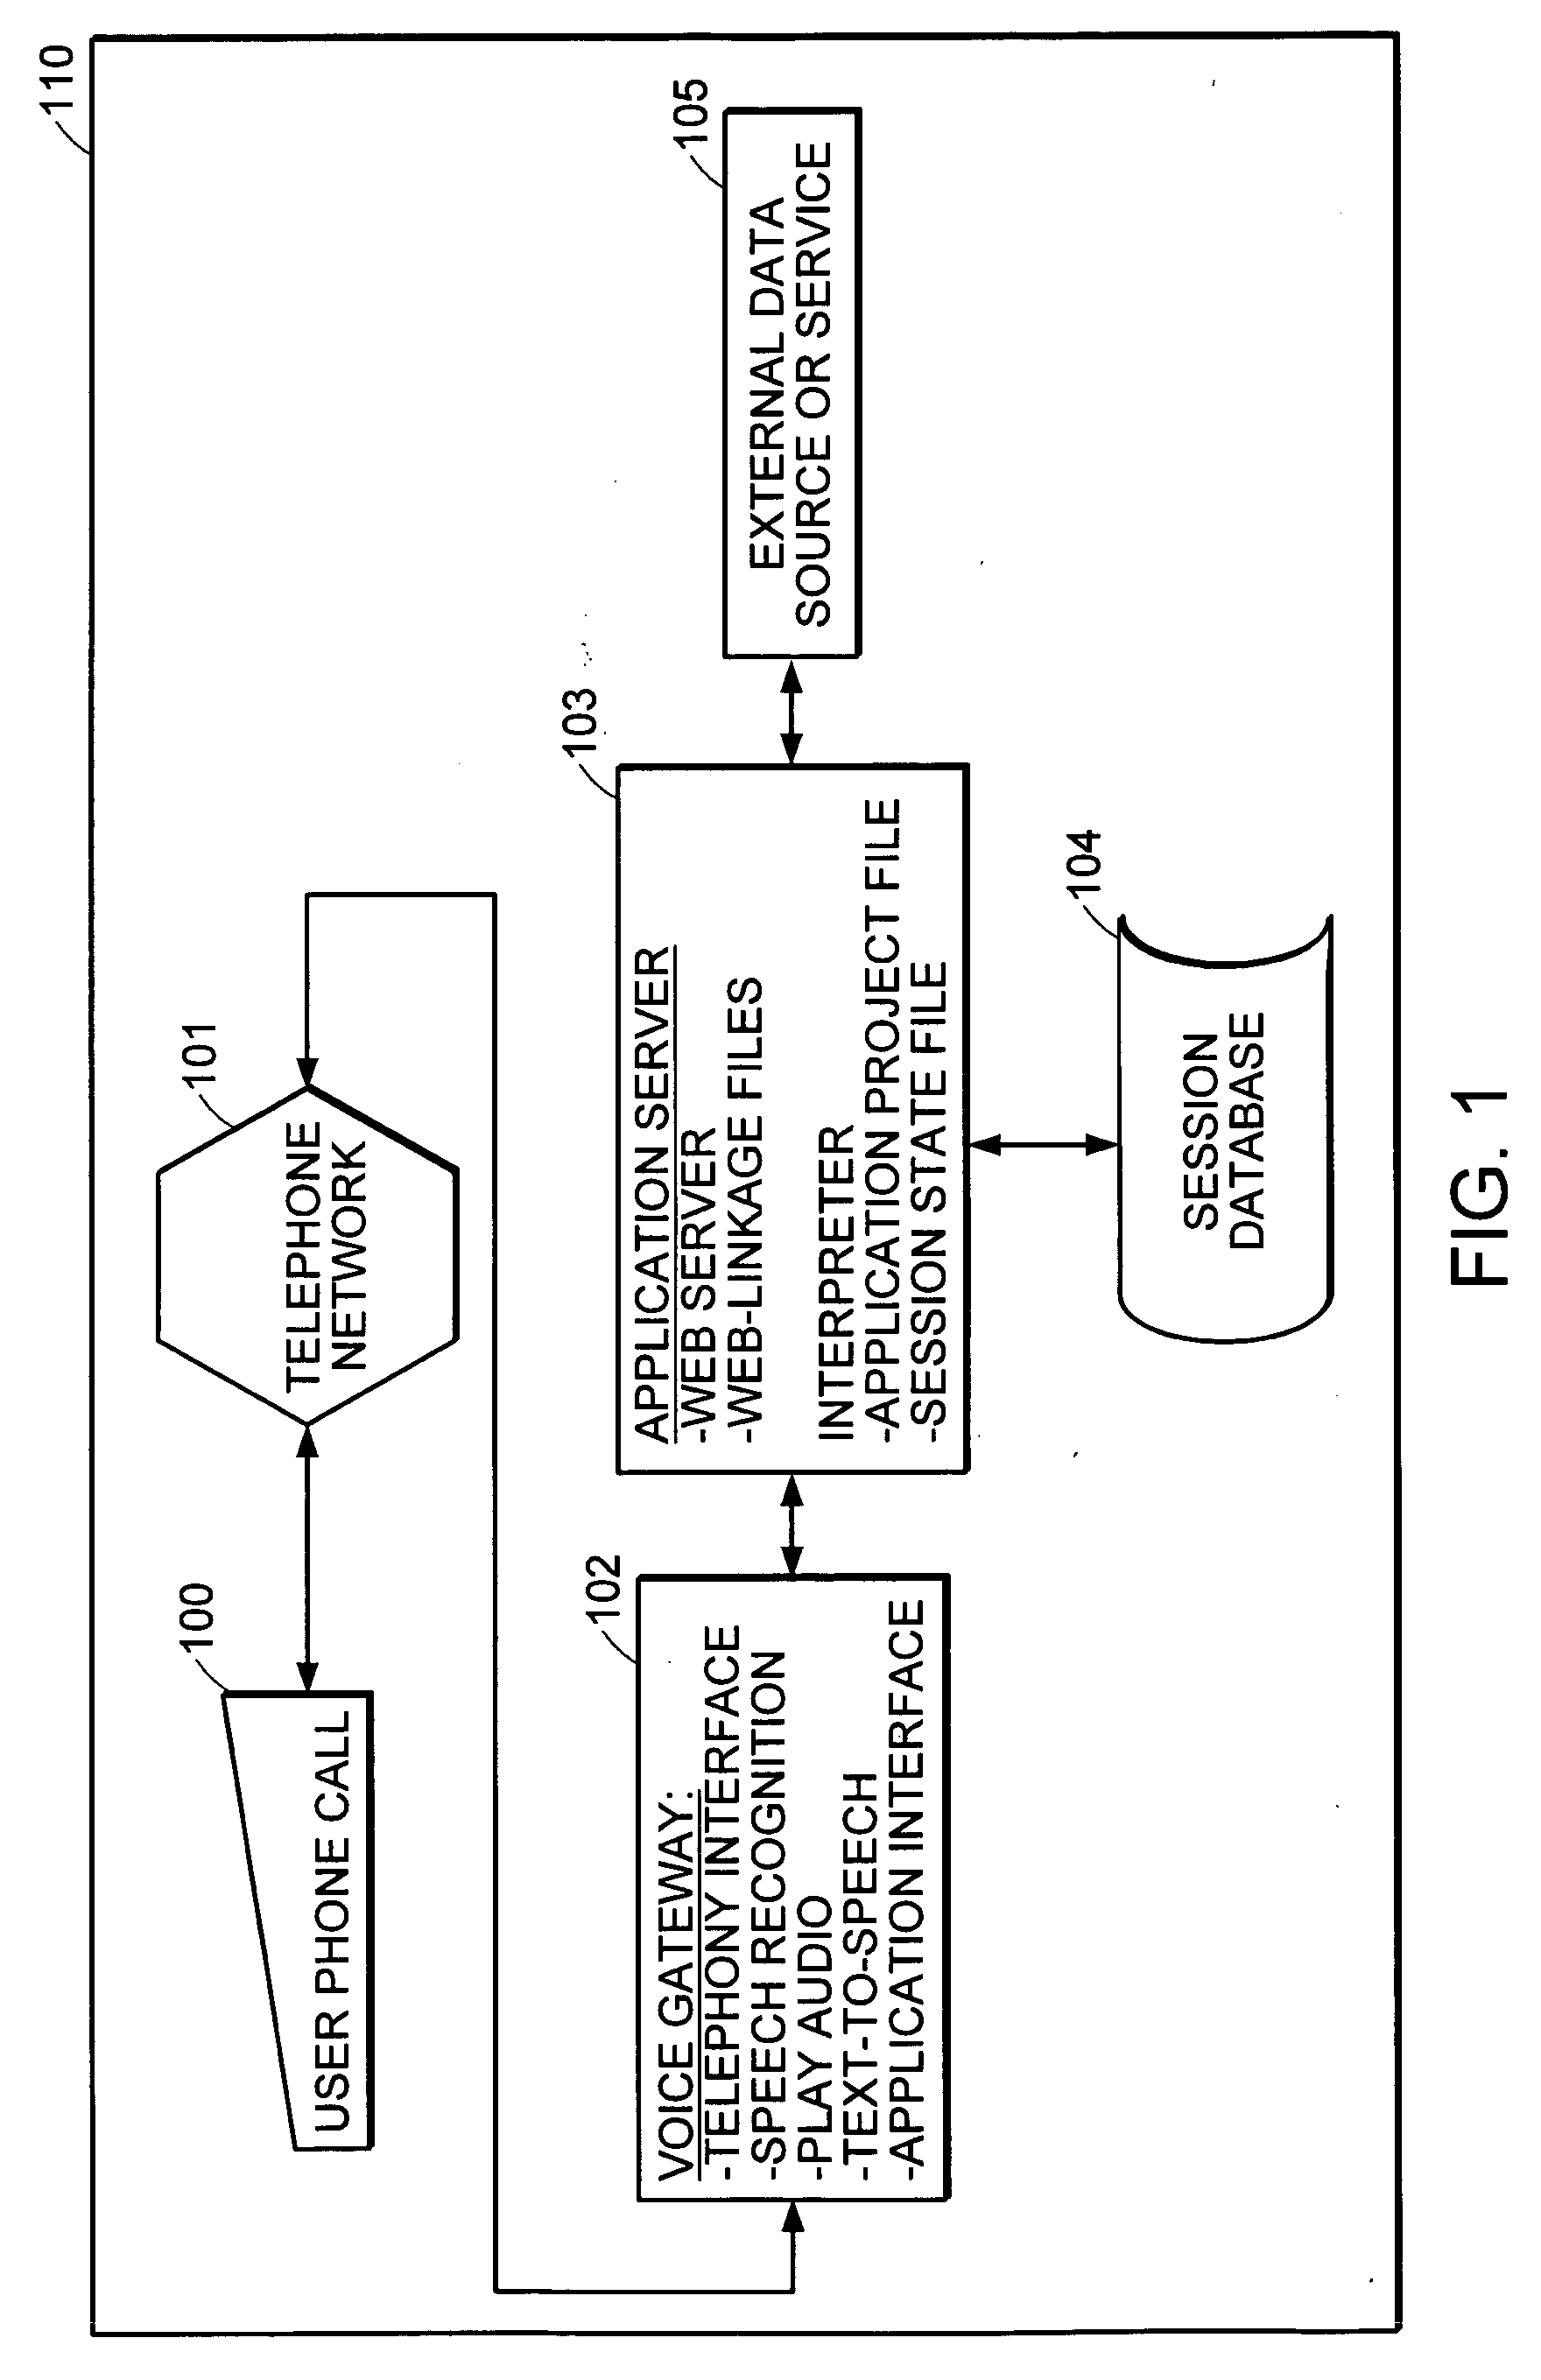 System, method, and programming language for developing and running dialogs between a user and a virtual agent